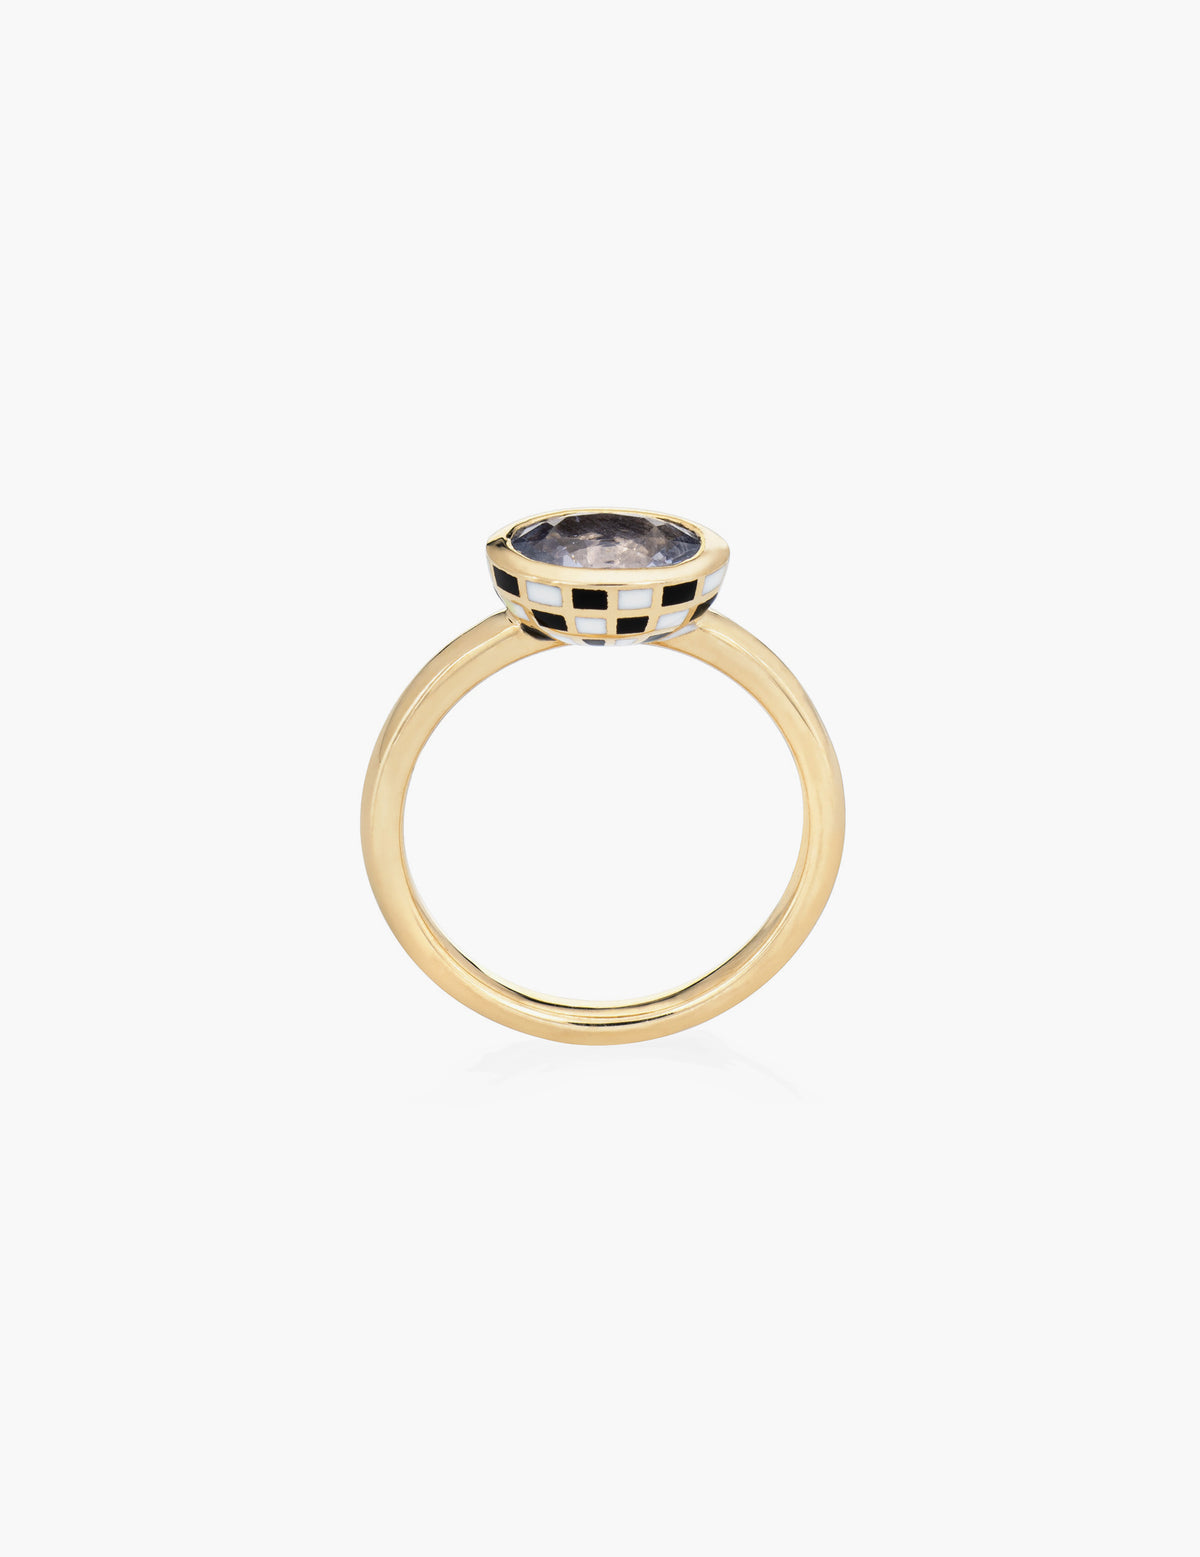 Chessboard Pale Blue Sapphire Ring